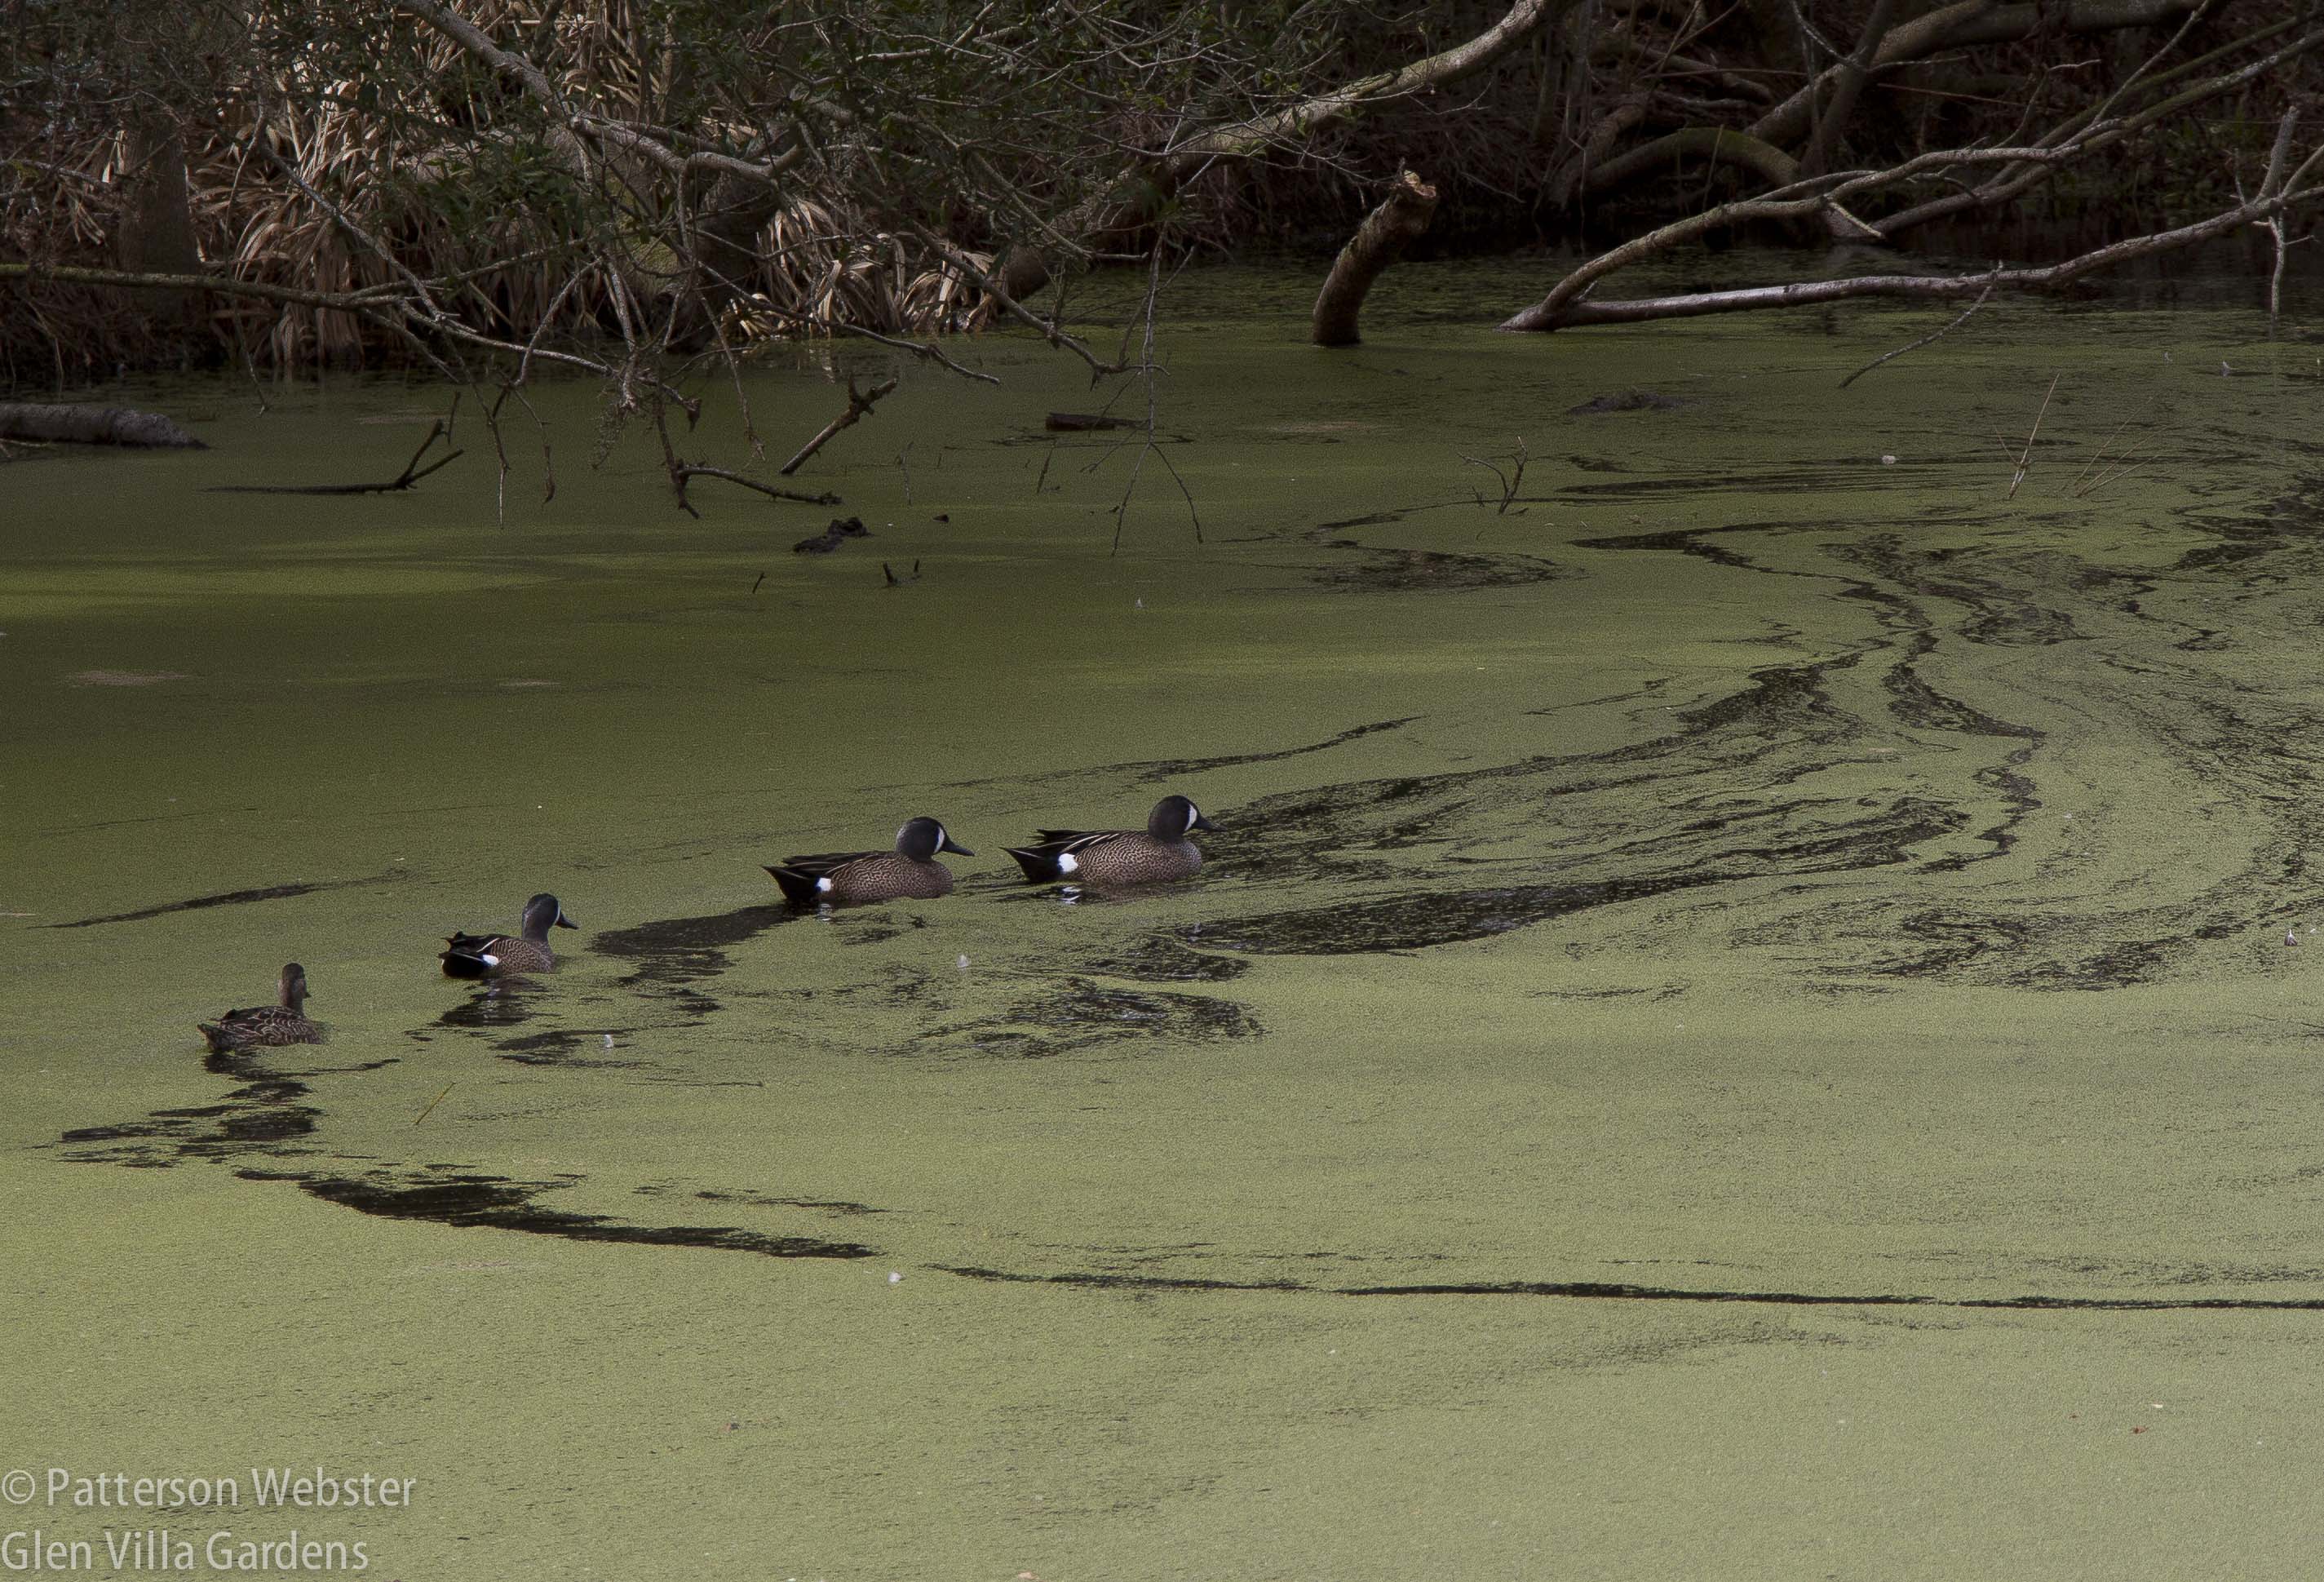 I like the swirling patterns the ducks have formed through the swamp weed.